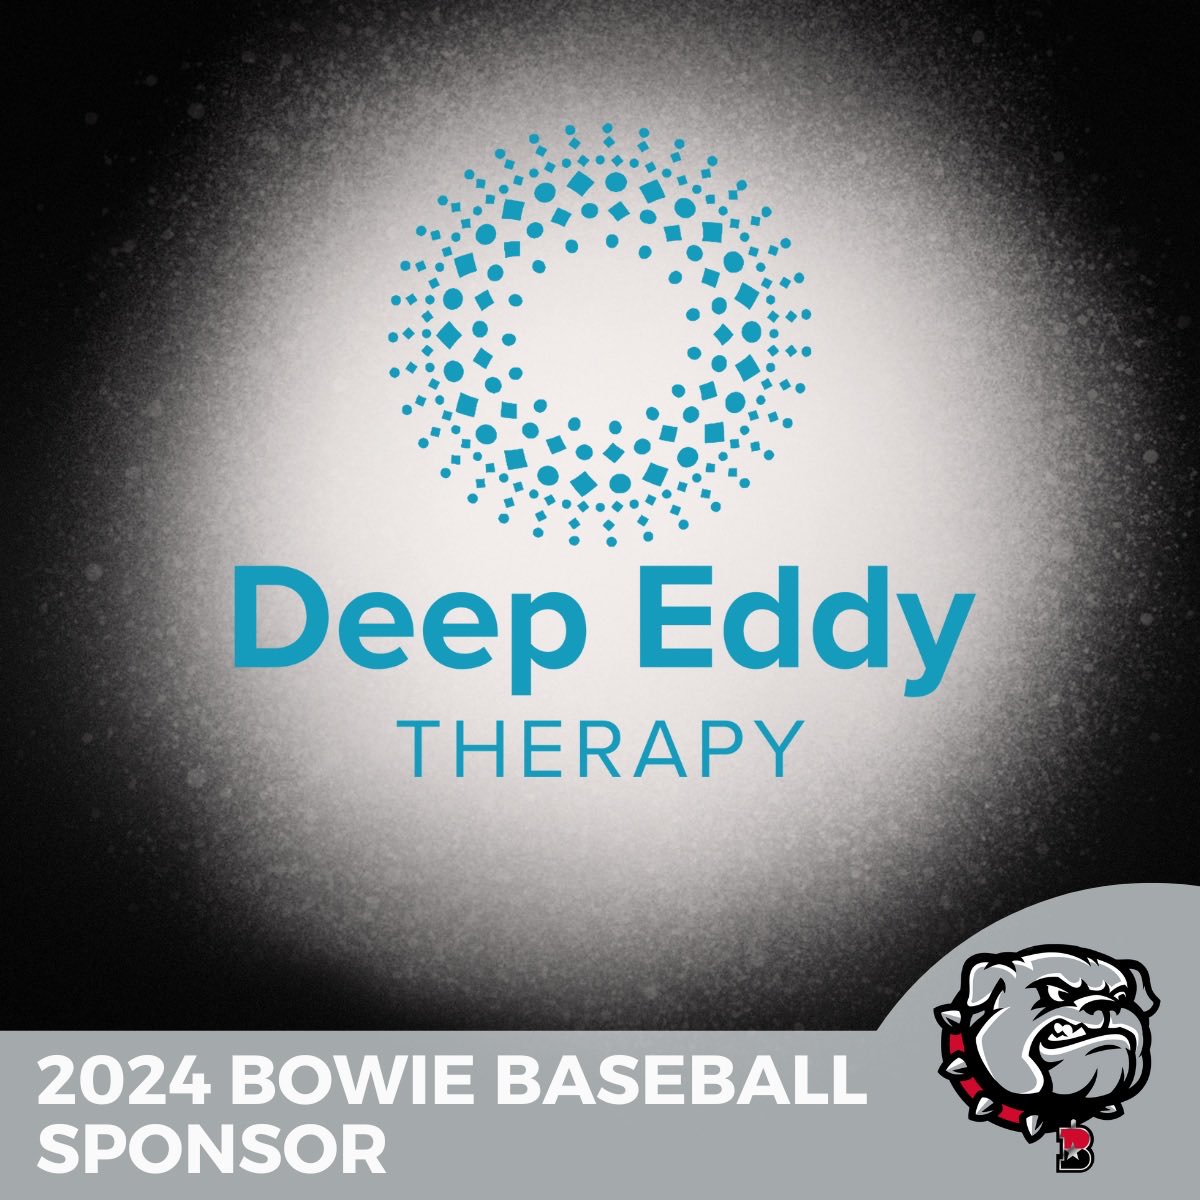 Special thanks to our sponsor Deep Eddy Therapy for their support of Bowie baseball!